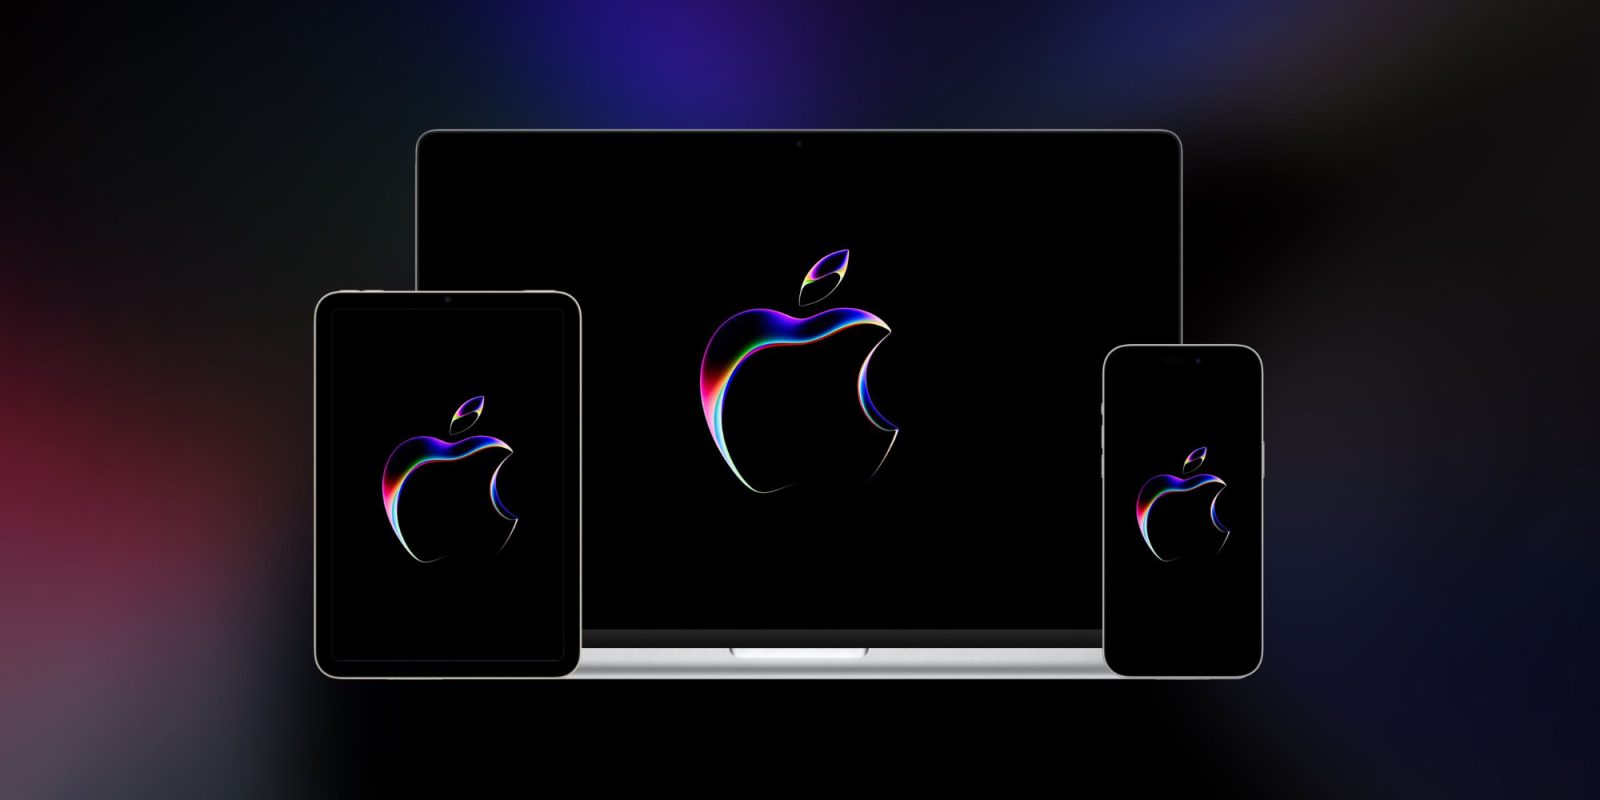 Get in the WWDC spirit with this slick wallpaper from Basic Apple Guy